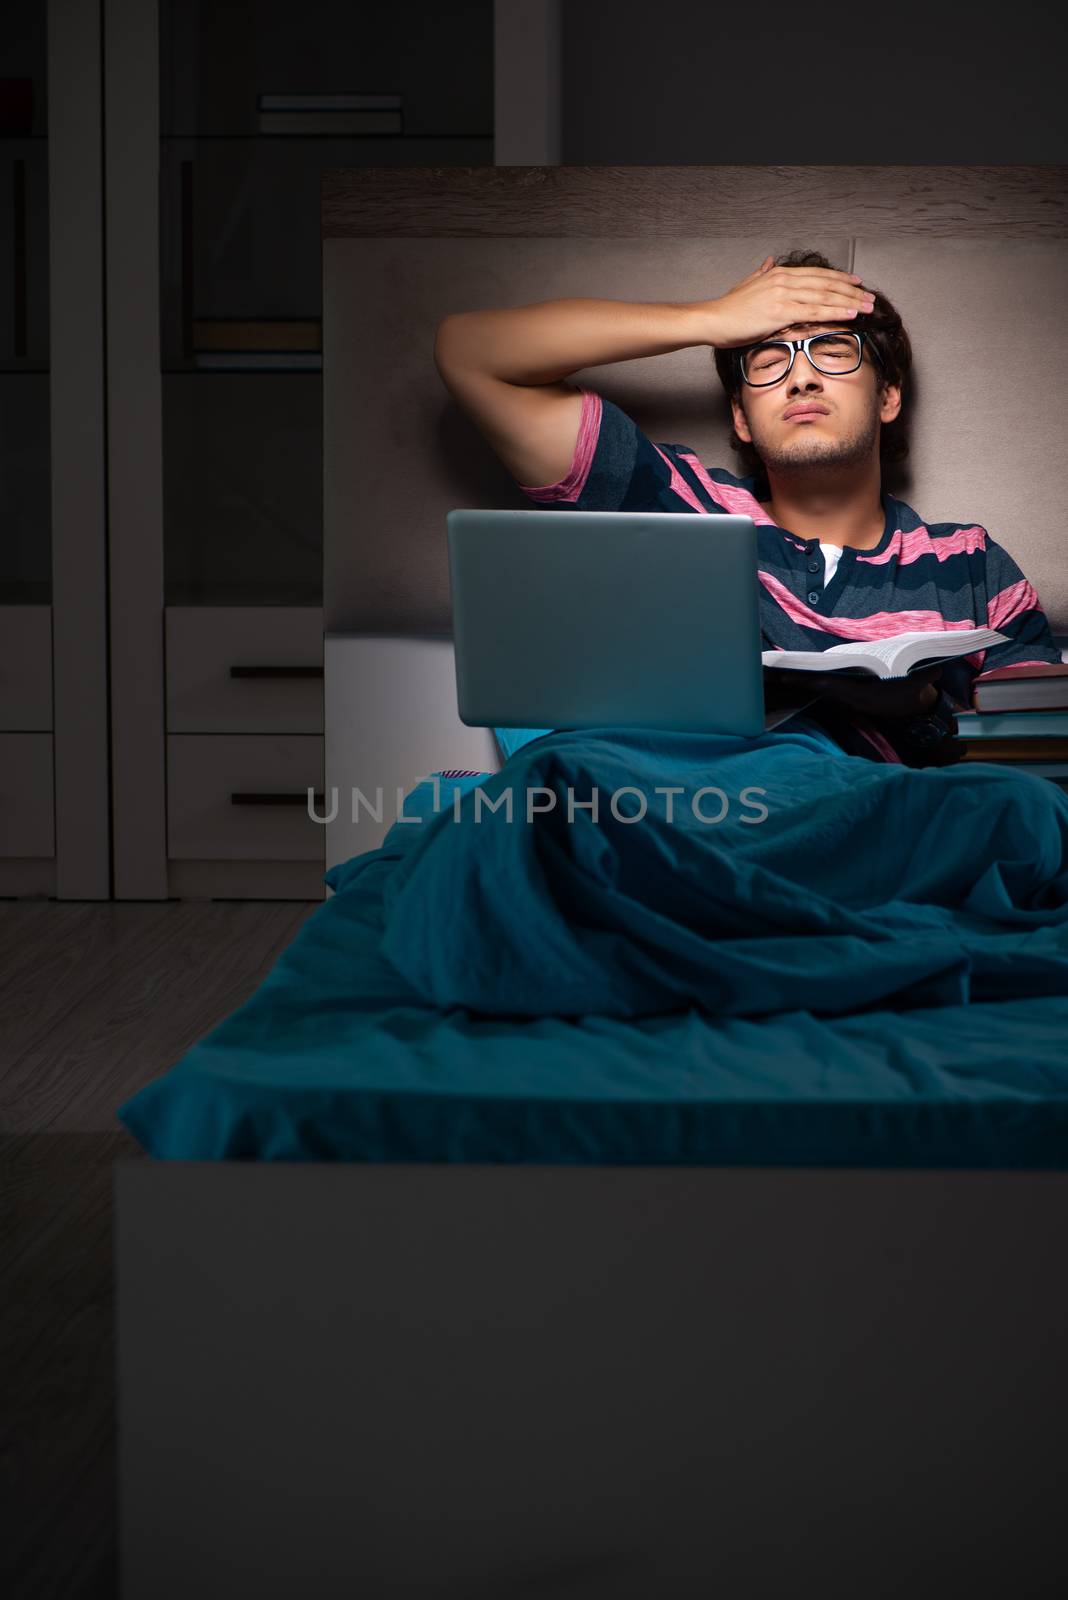 Young student preparing for exams at night at home 